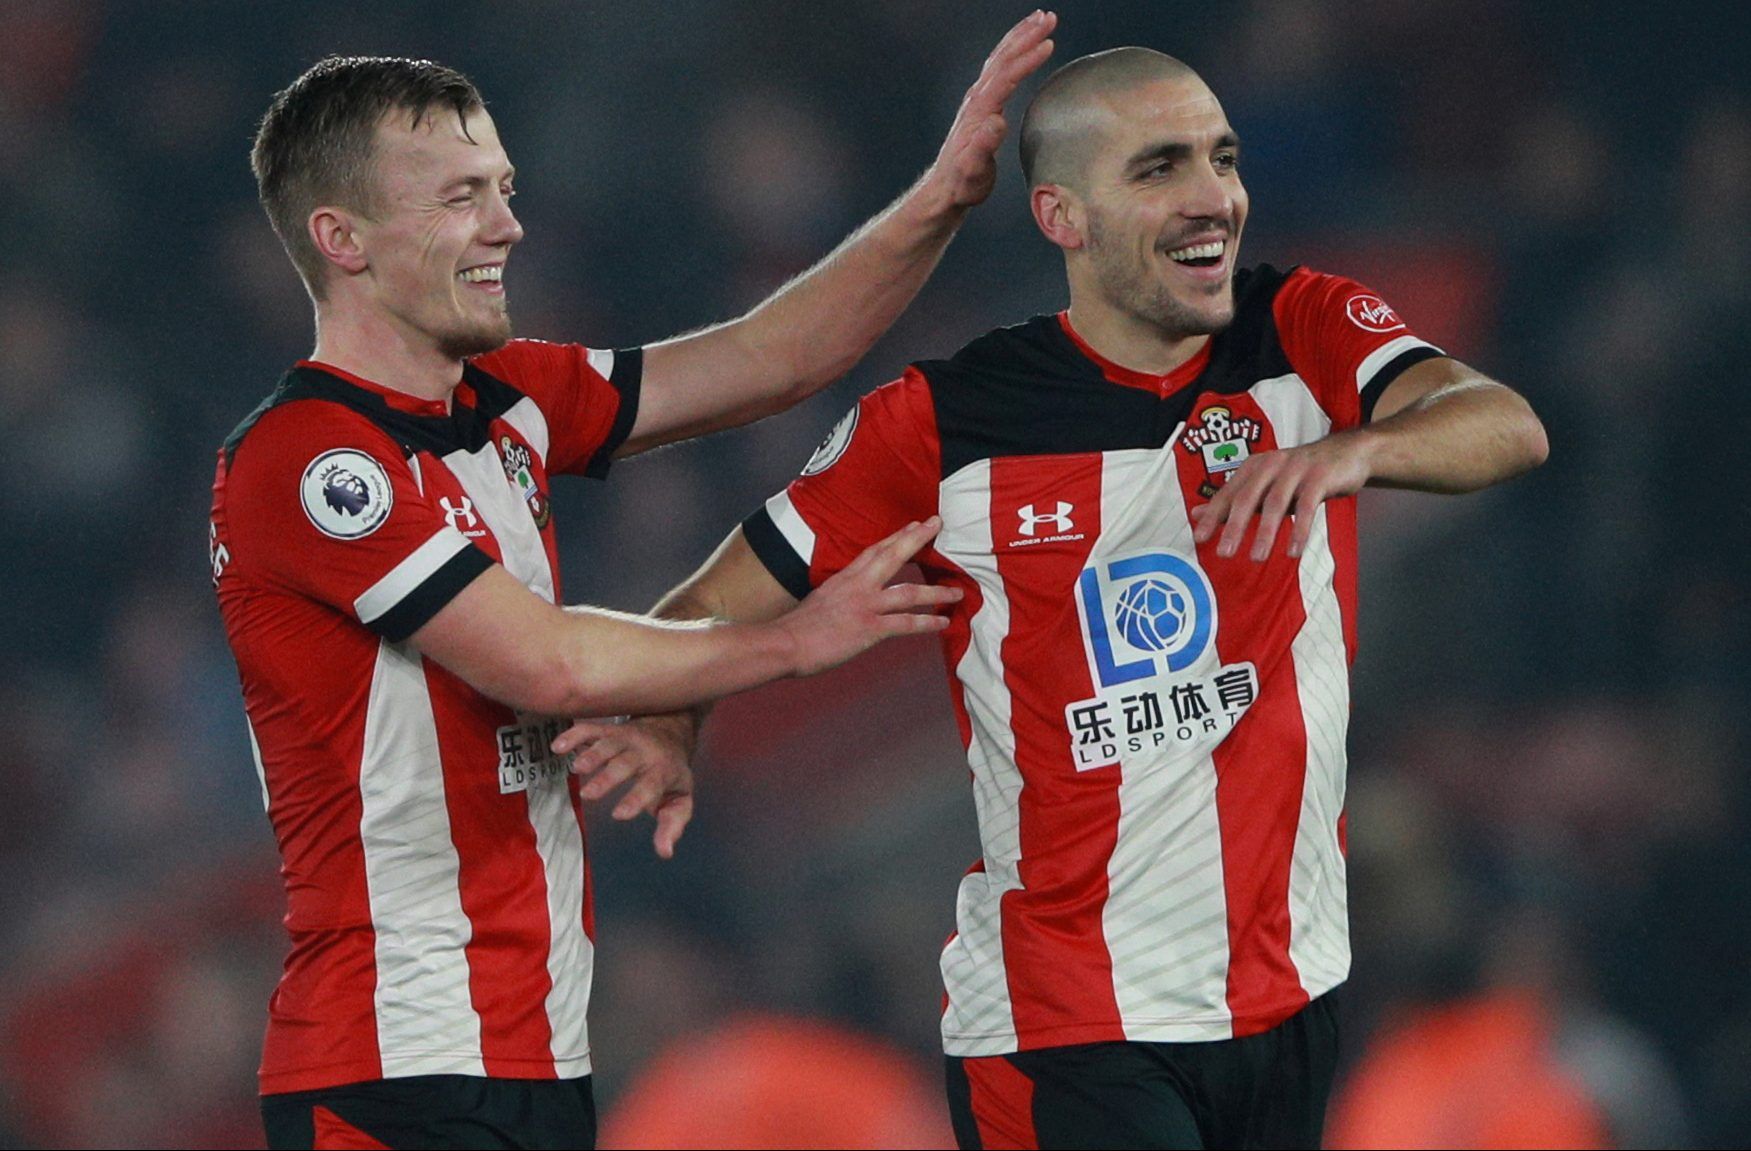 Soccer Football - Premier League - Southampton v Tottenham Hotspur - St Mary's Stadium, Southampton, Britain - January 1, 2020  Southampton's James Ward-Prowse and Oriol Romeu celebrate after the match          REUTERS/Ian Walton  EDITORIAL USE ONLY. No use with unauthorized audio, video, data, fixture lists, club/league logos or 